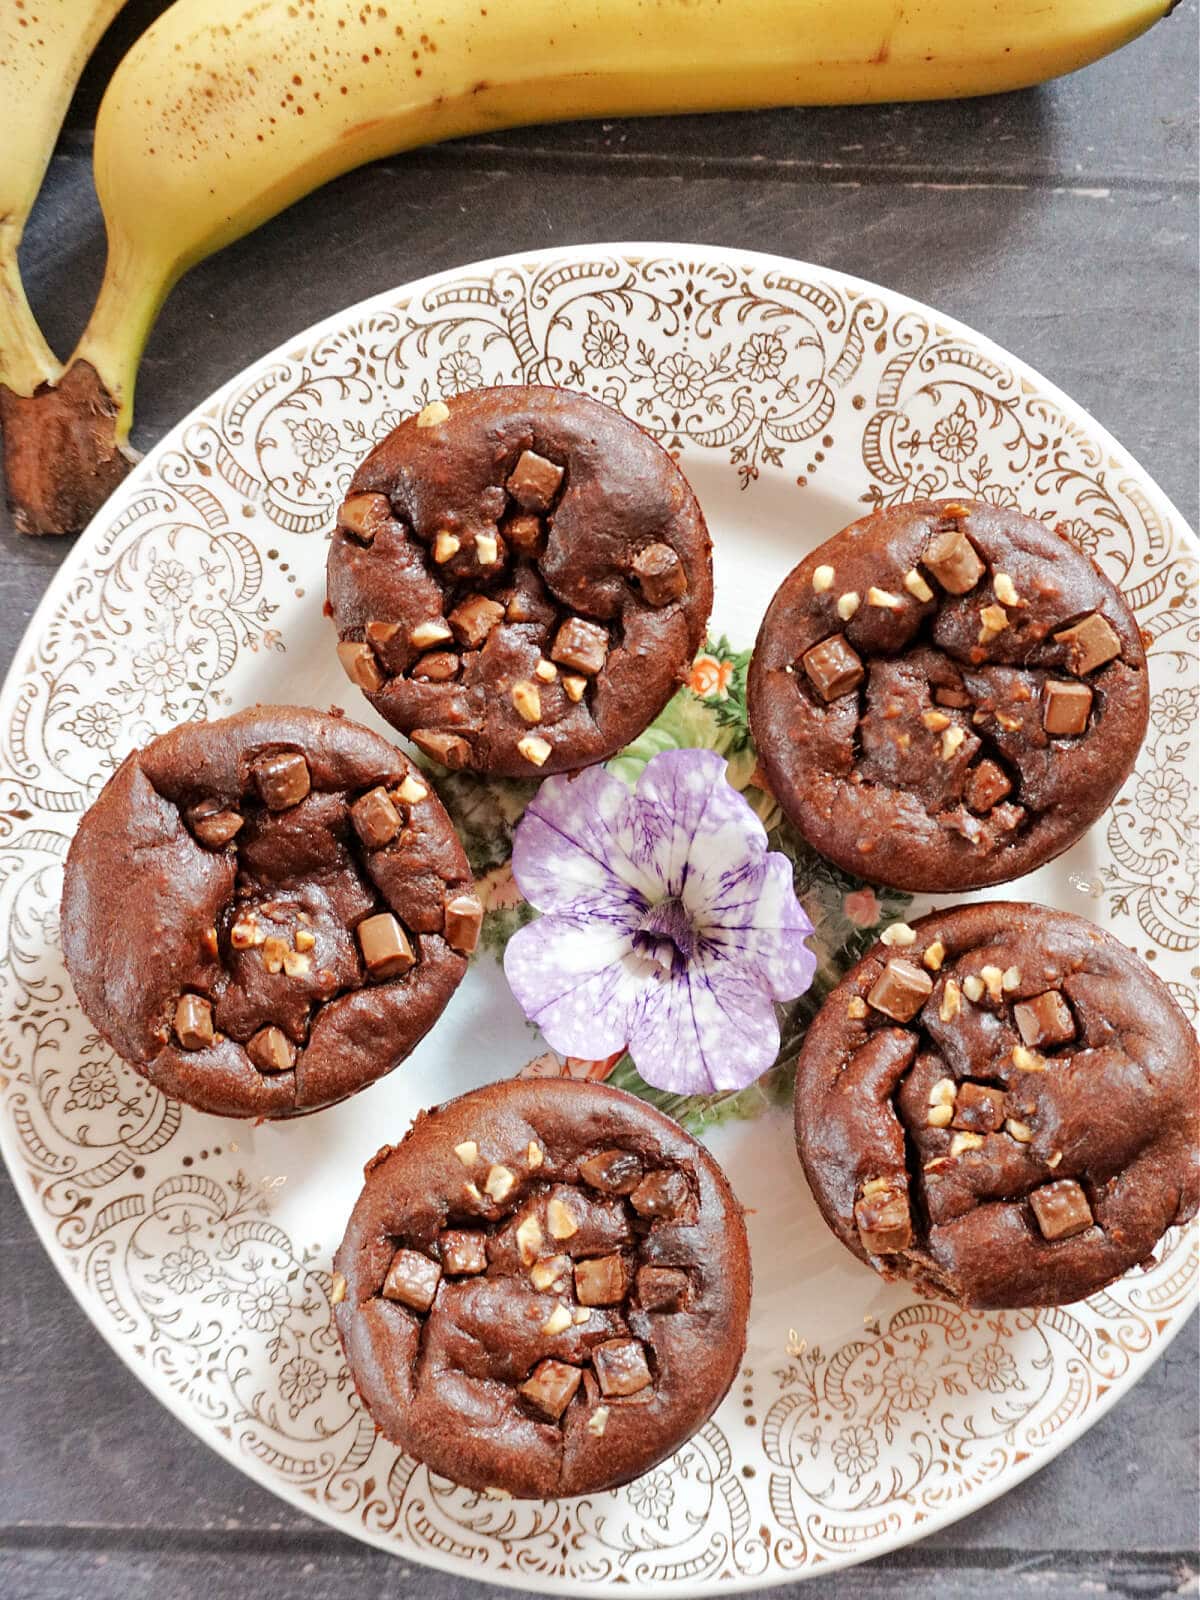 Overhead shot of a plate with 5 round brownies and a flower in the middle of the plate